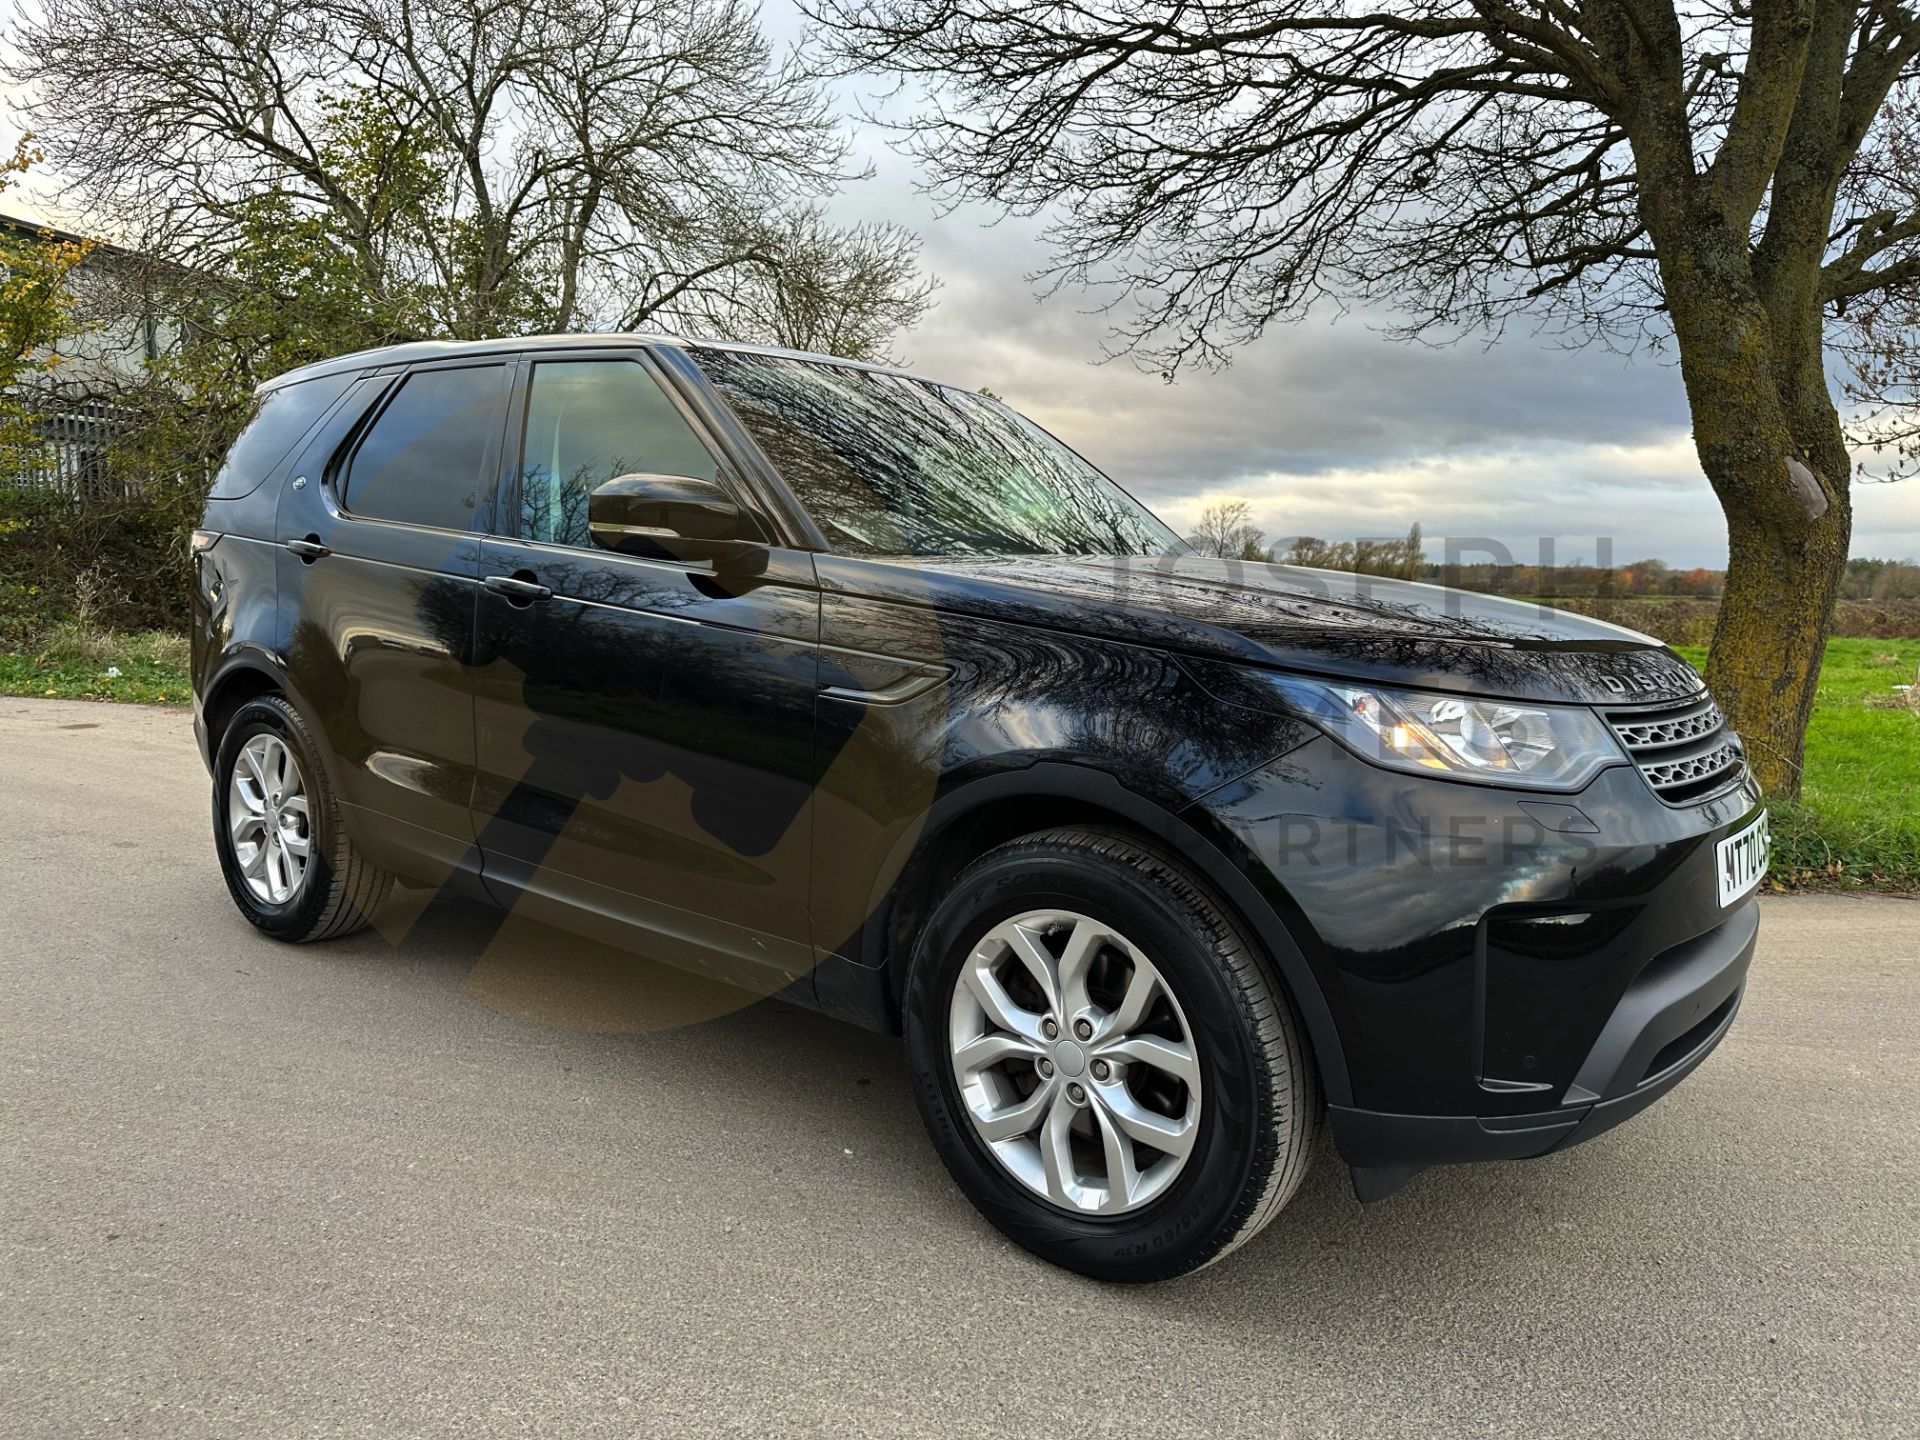 LAND ROVER DISCOVERY 5 *ALL NEW MODEL* (2021 - EURO 6) 8 SPEED AUTO (1 OWNER) *ONLY 19,000 MILES* - Image 3 of 50